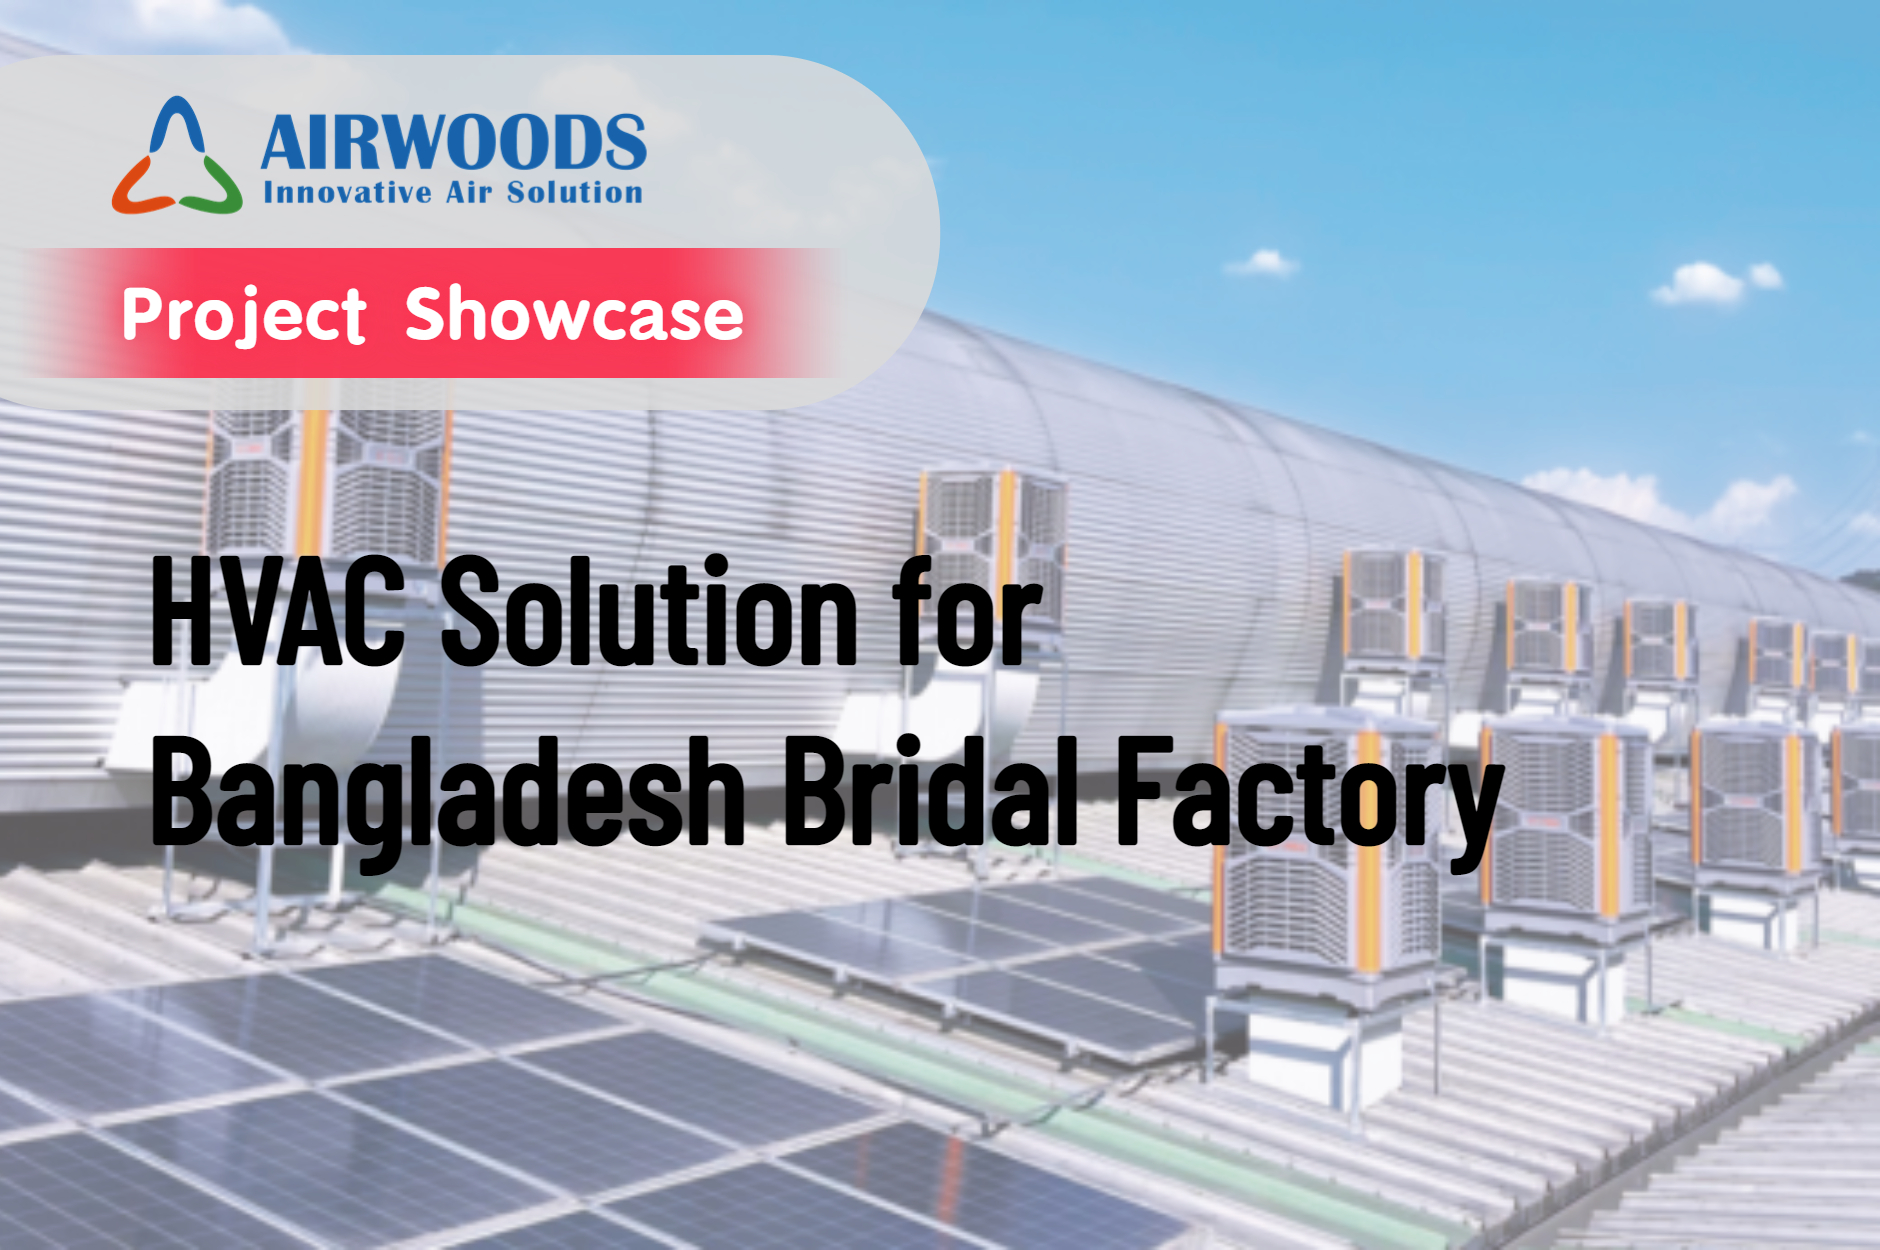 Airwoods HVAC Solution for a Bridal Factory